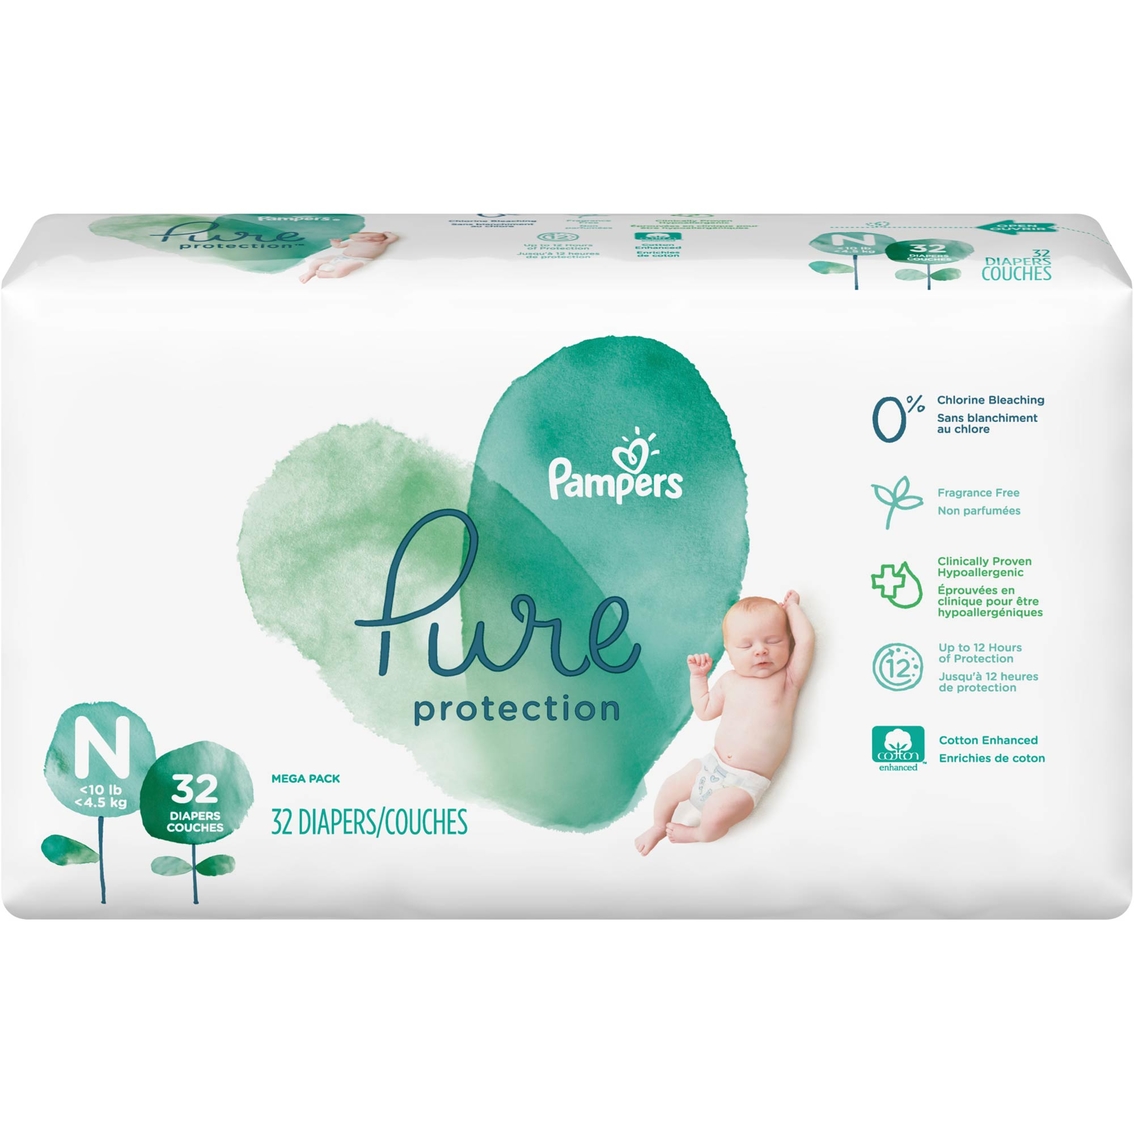 Andere plaatsen warm Hectare Pampers Pure Protection Mega Pack Diapers Newborn (less Than 10 Lbs.) 32 Ct.  | Diapers | Baby & Toys | Shop The Exchange